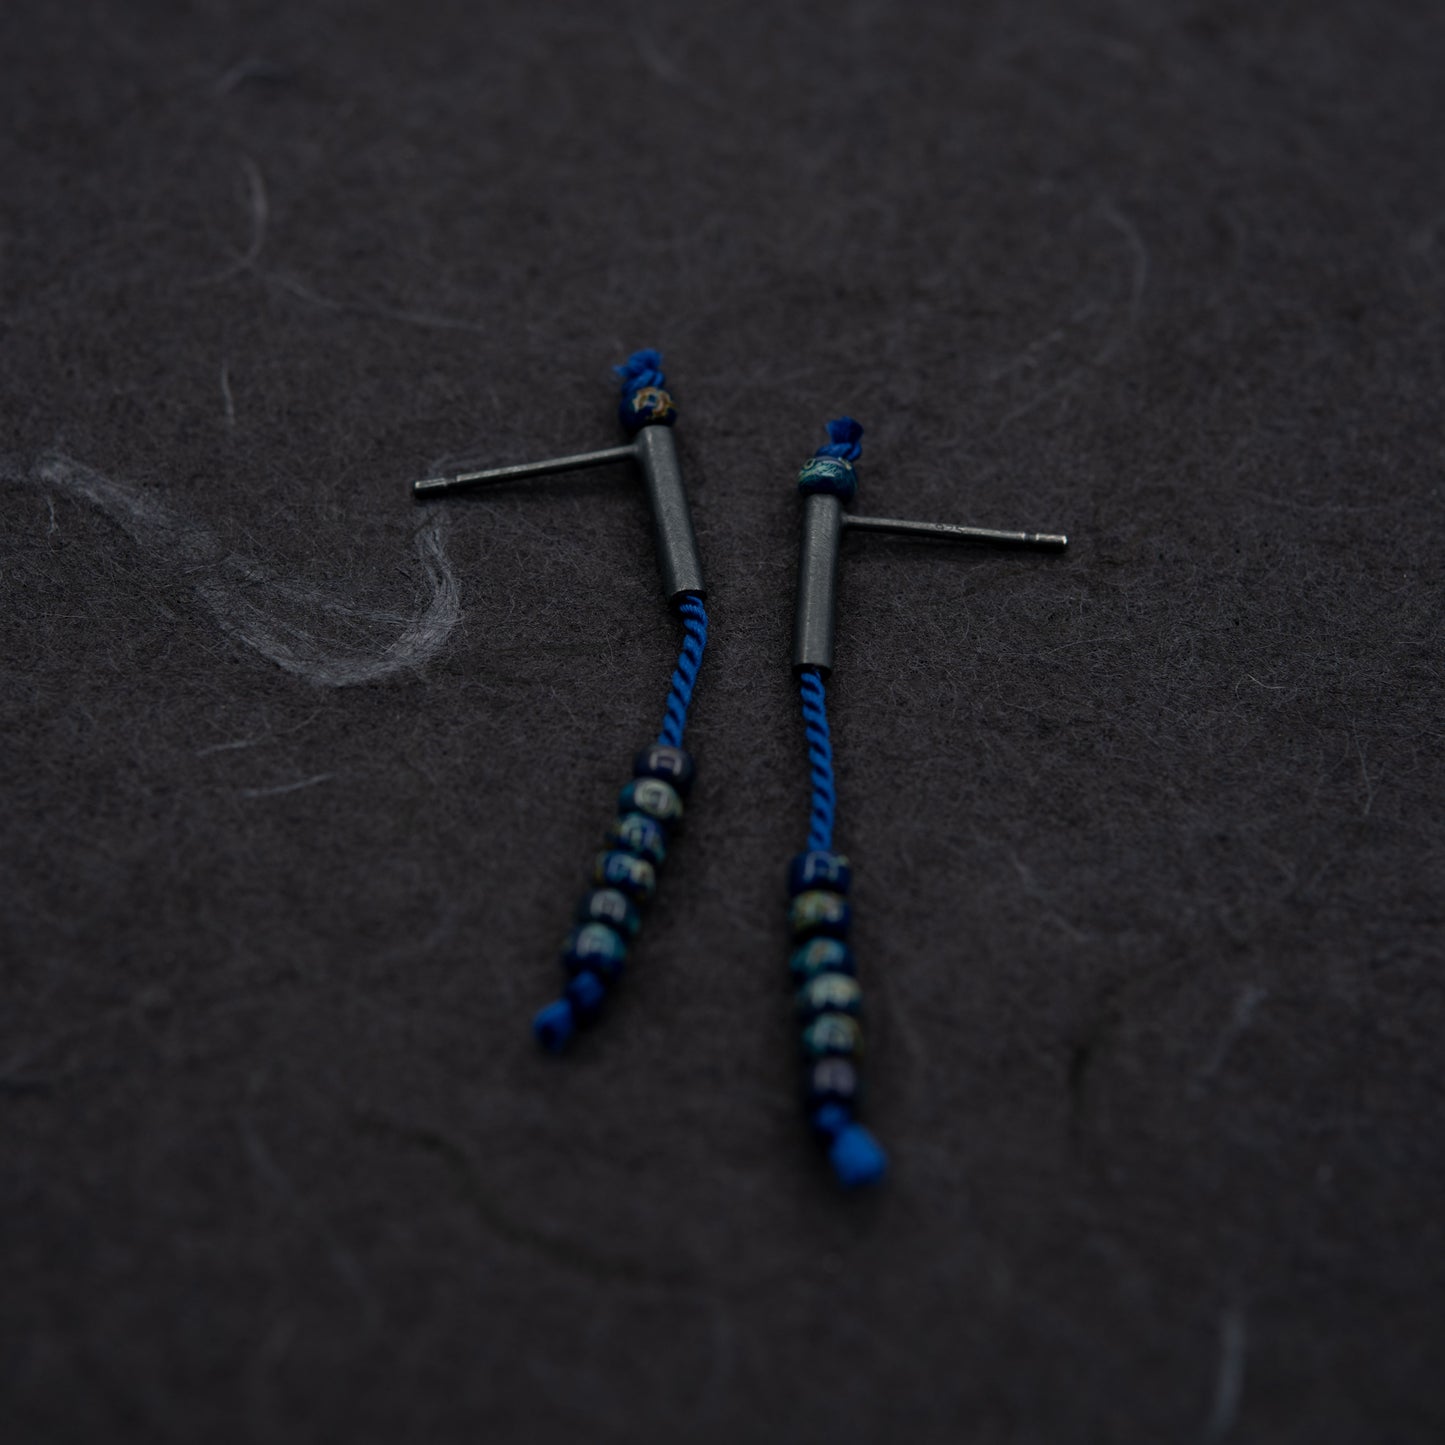 Image showing a pair of 38 mm length pendant earrings handmade in oxidized black sterling silver tube with a blue silk cord threaded through the center for hanging Picasso blue Miyuki beads. Designed and made by hand in Paris by A g J c 